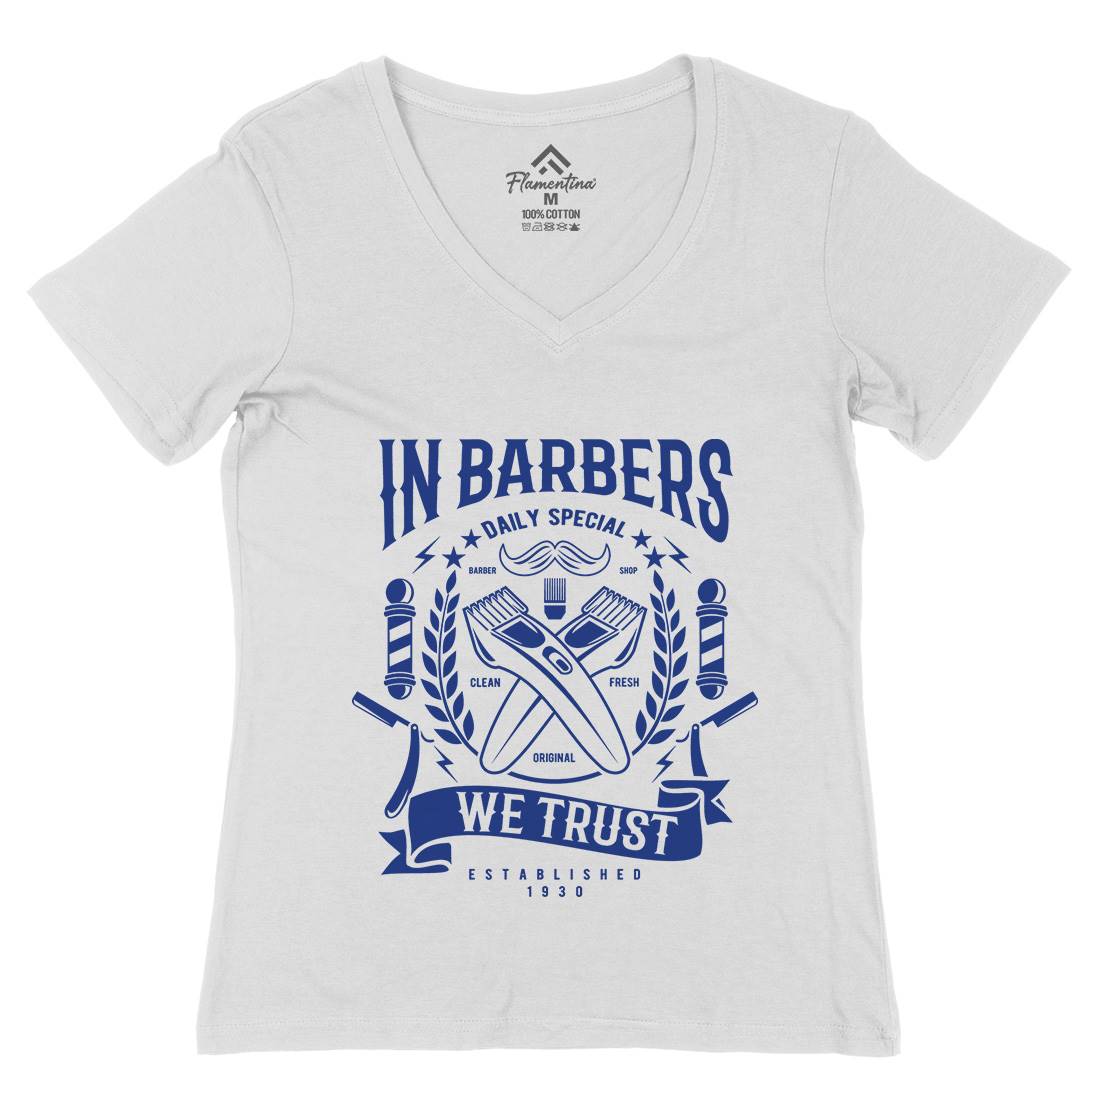 In Barbers We Trust Womens Organic V-Neck T-Shirt Barber A070